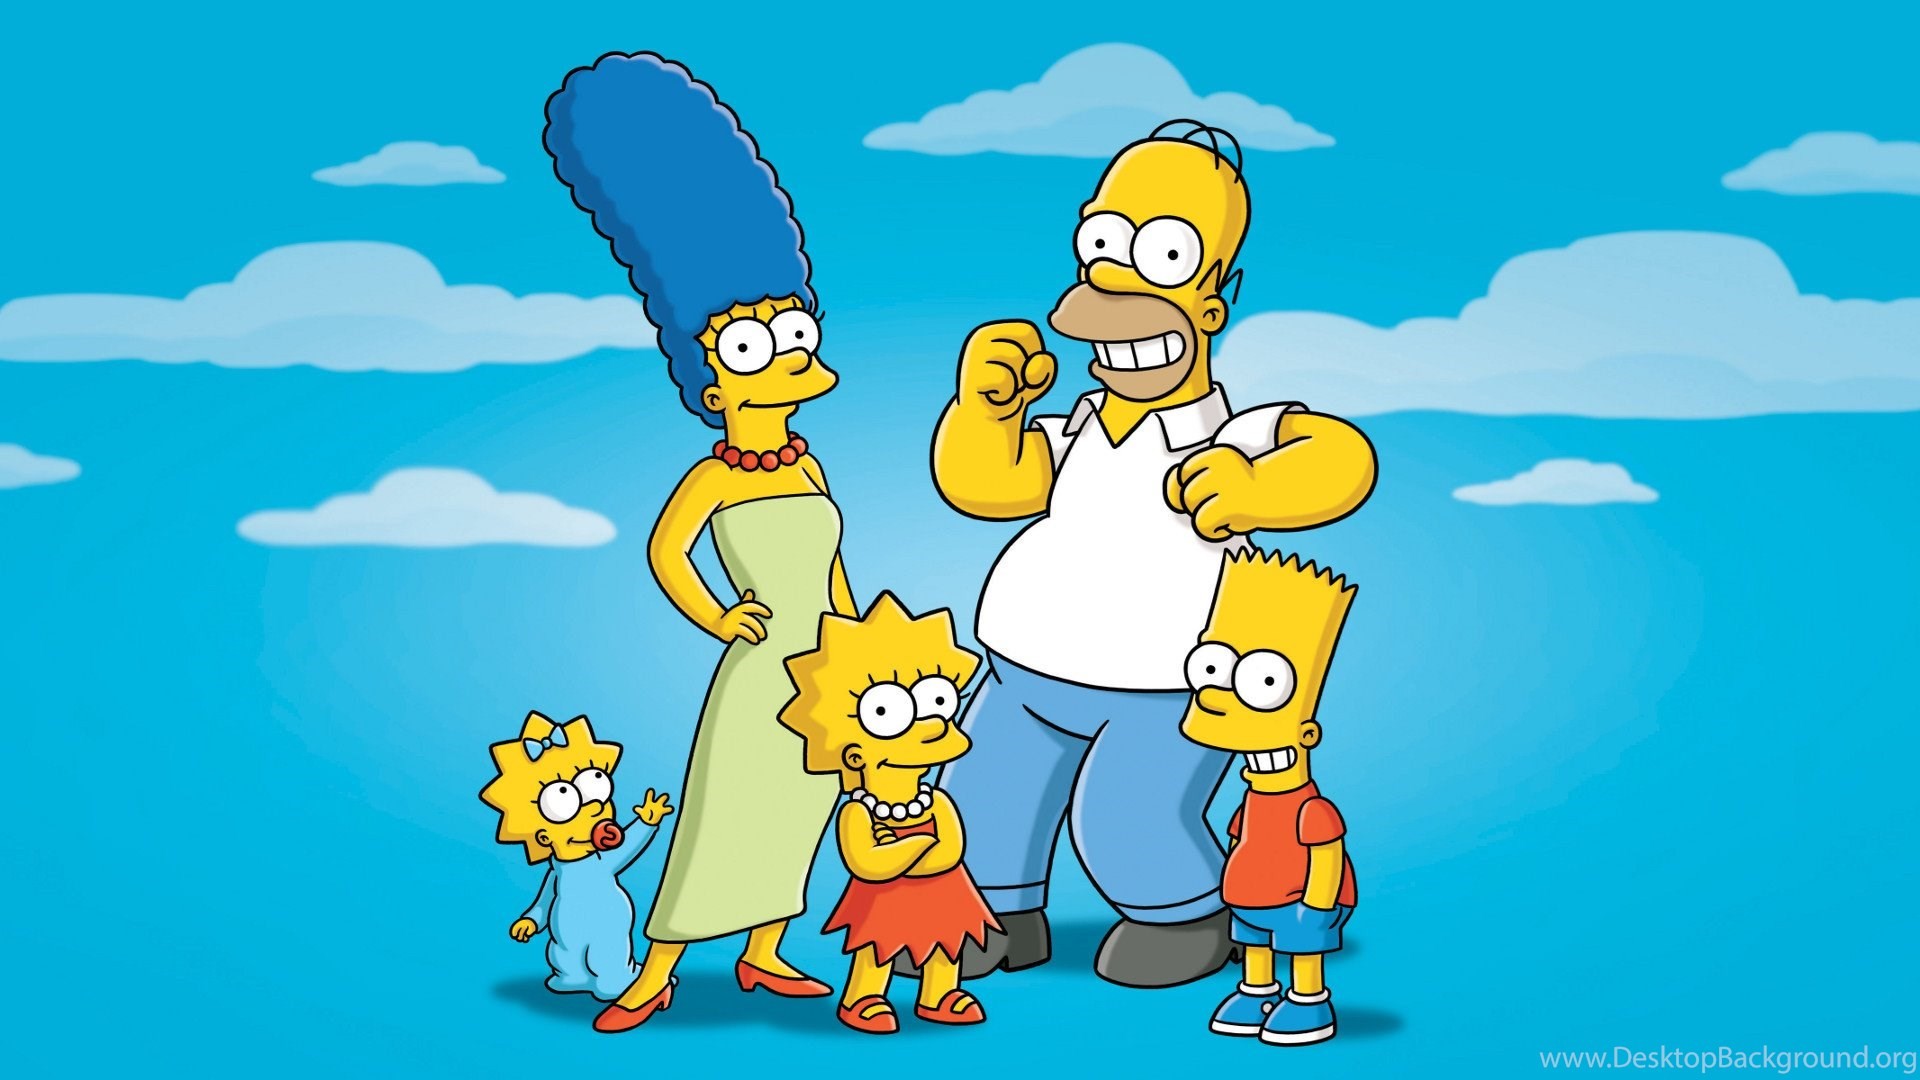 1920x1080 The Simpsons Wallpapers HD